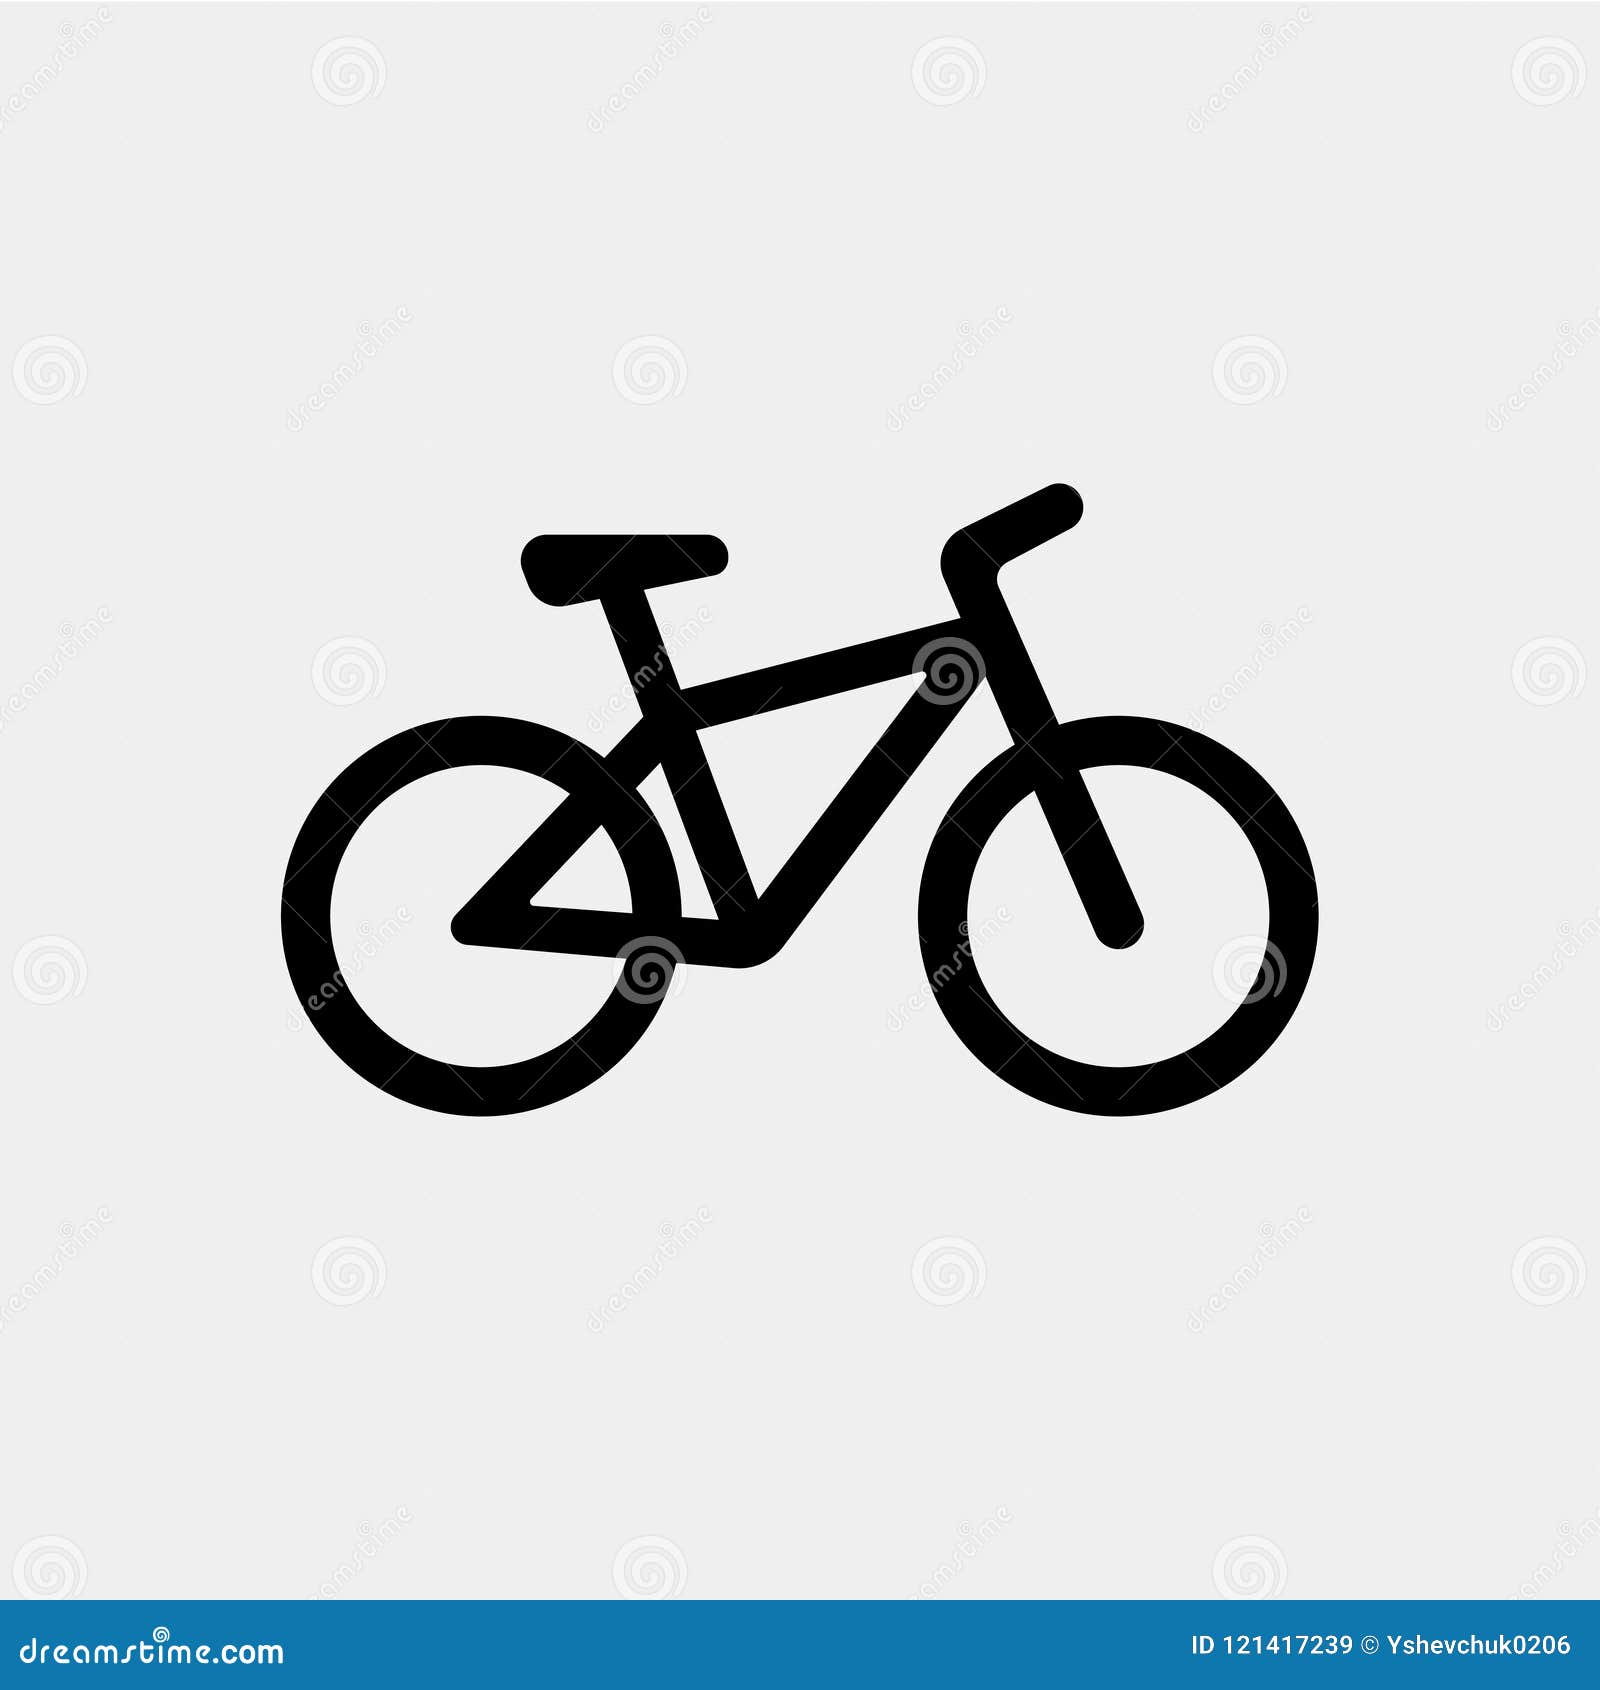 Bicycle, Cycle, Bike Sign Gray Background. Vector Illustration ...